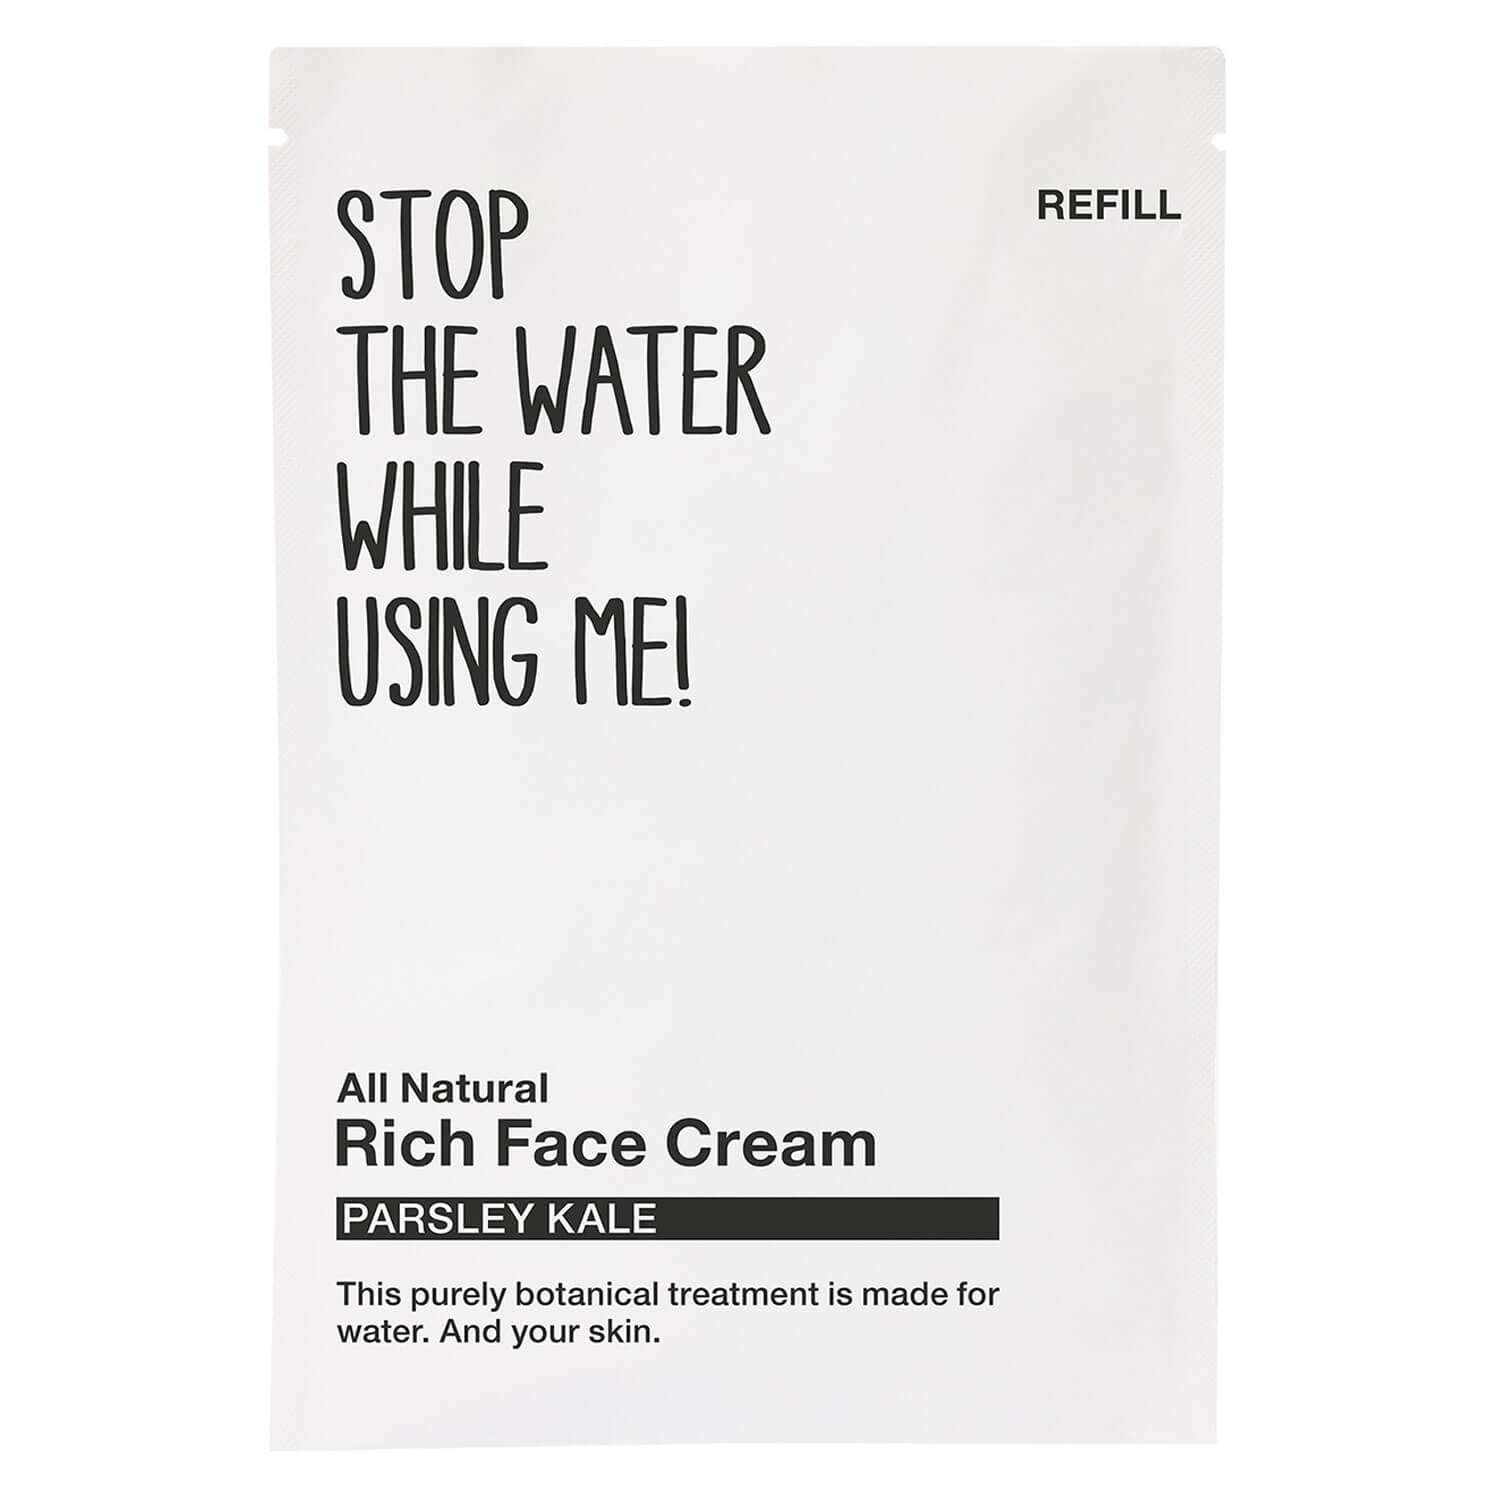 Product image from All Natural Face - Refill Rich Face Cream Parsley Kale